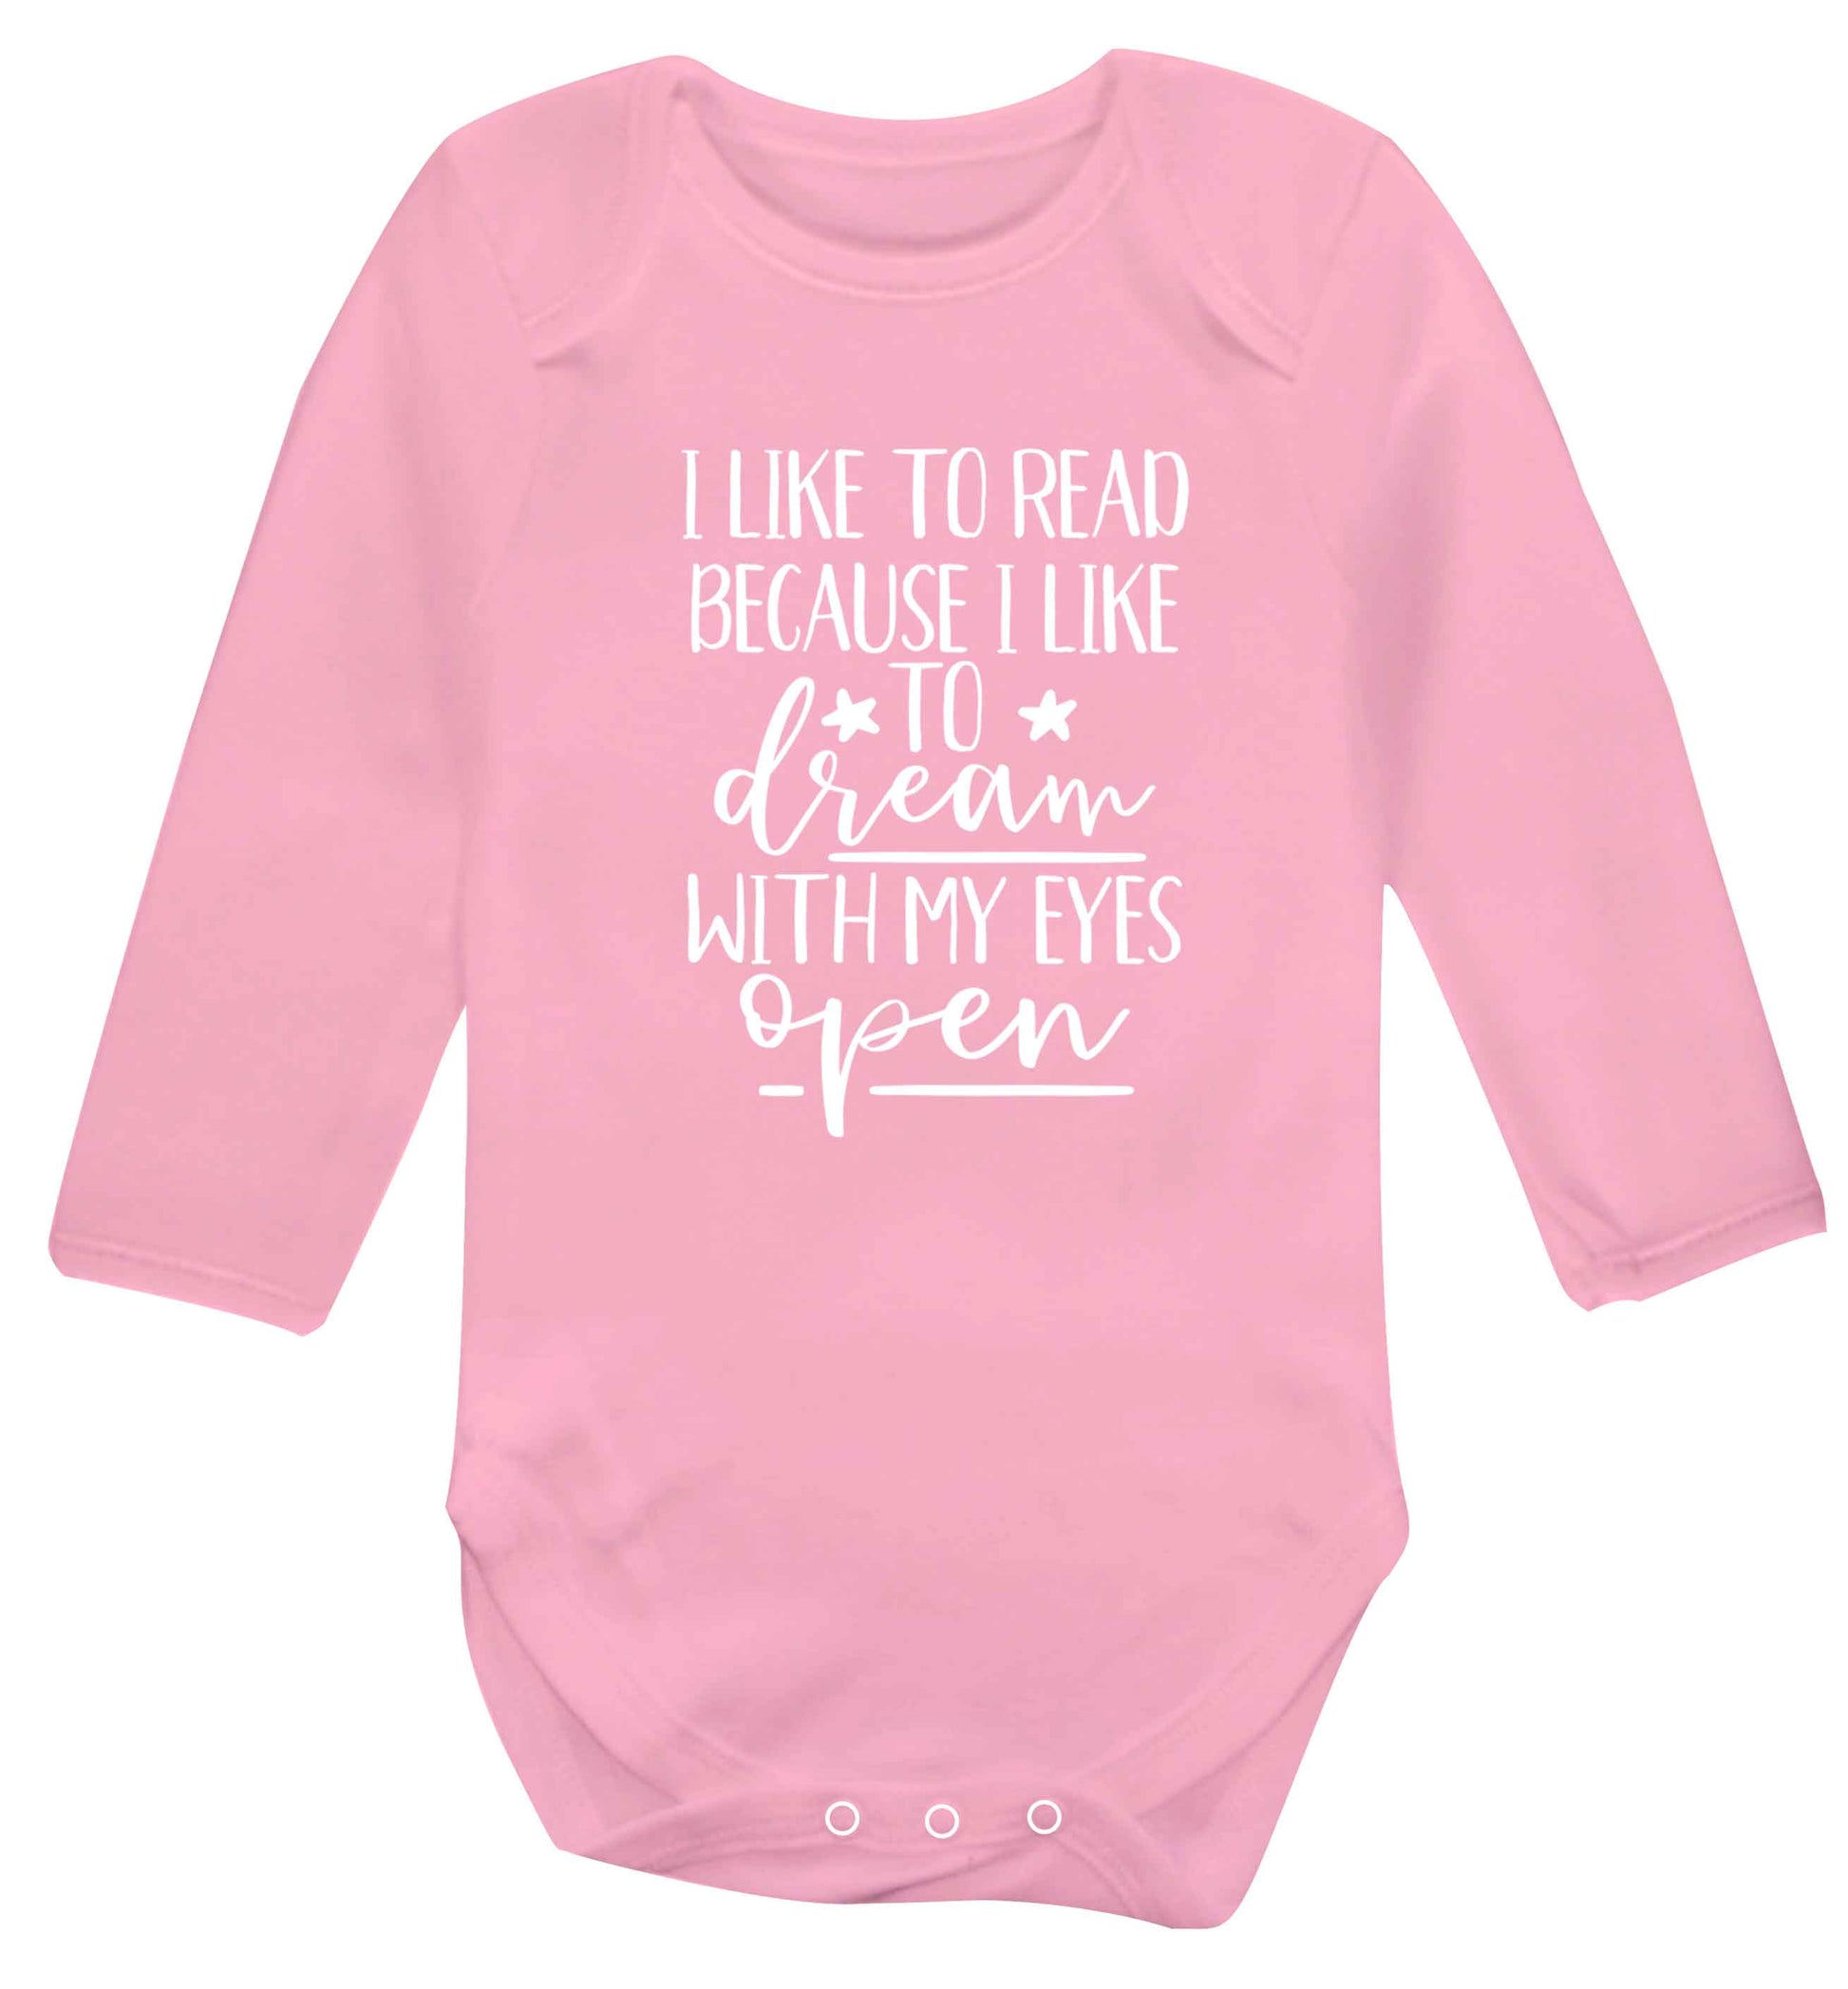 I like to read because I like to dream with my eyes open Baby Vest long sleeved pale pink 6-12 months